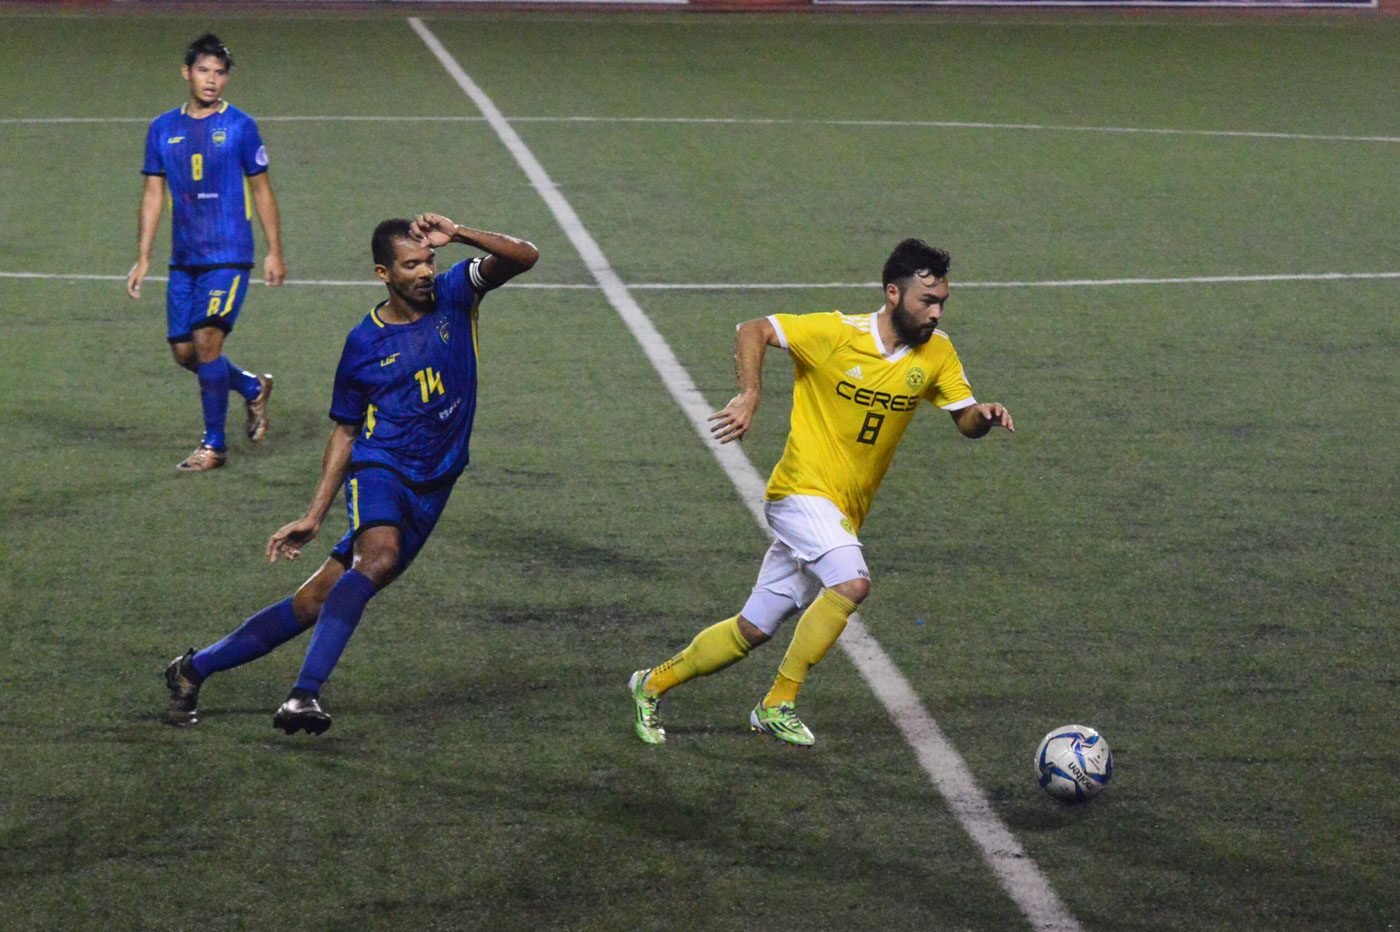 Can a shorthanded Ceres Negros capture the ASEAN Zonal title?